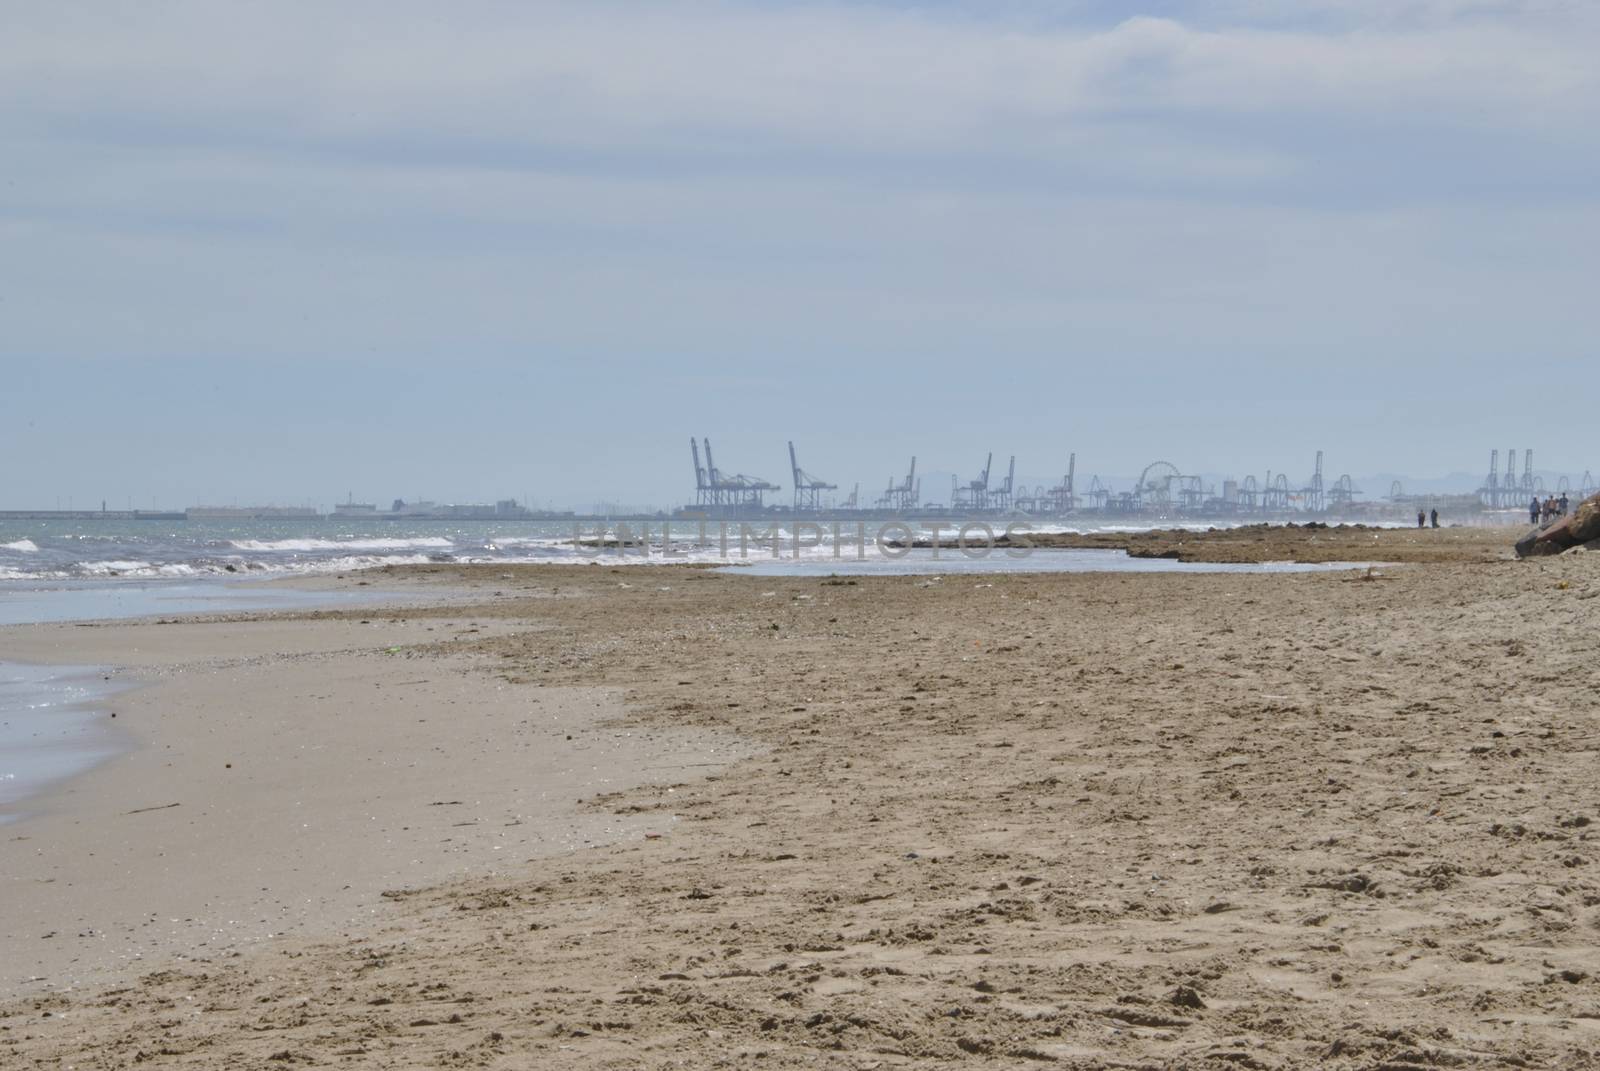 The port cranes seen from the beach. Machine colors